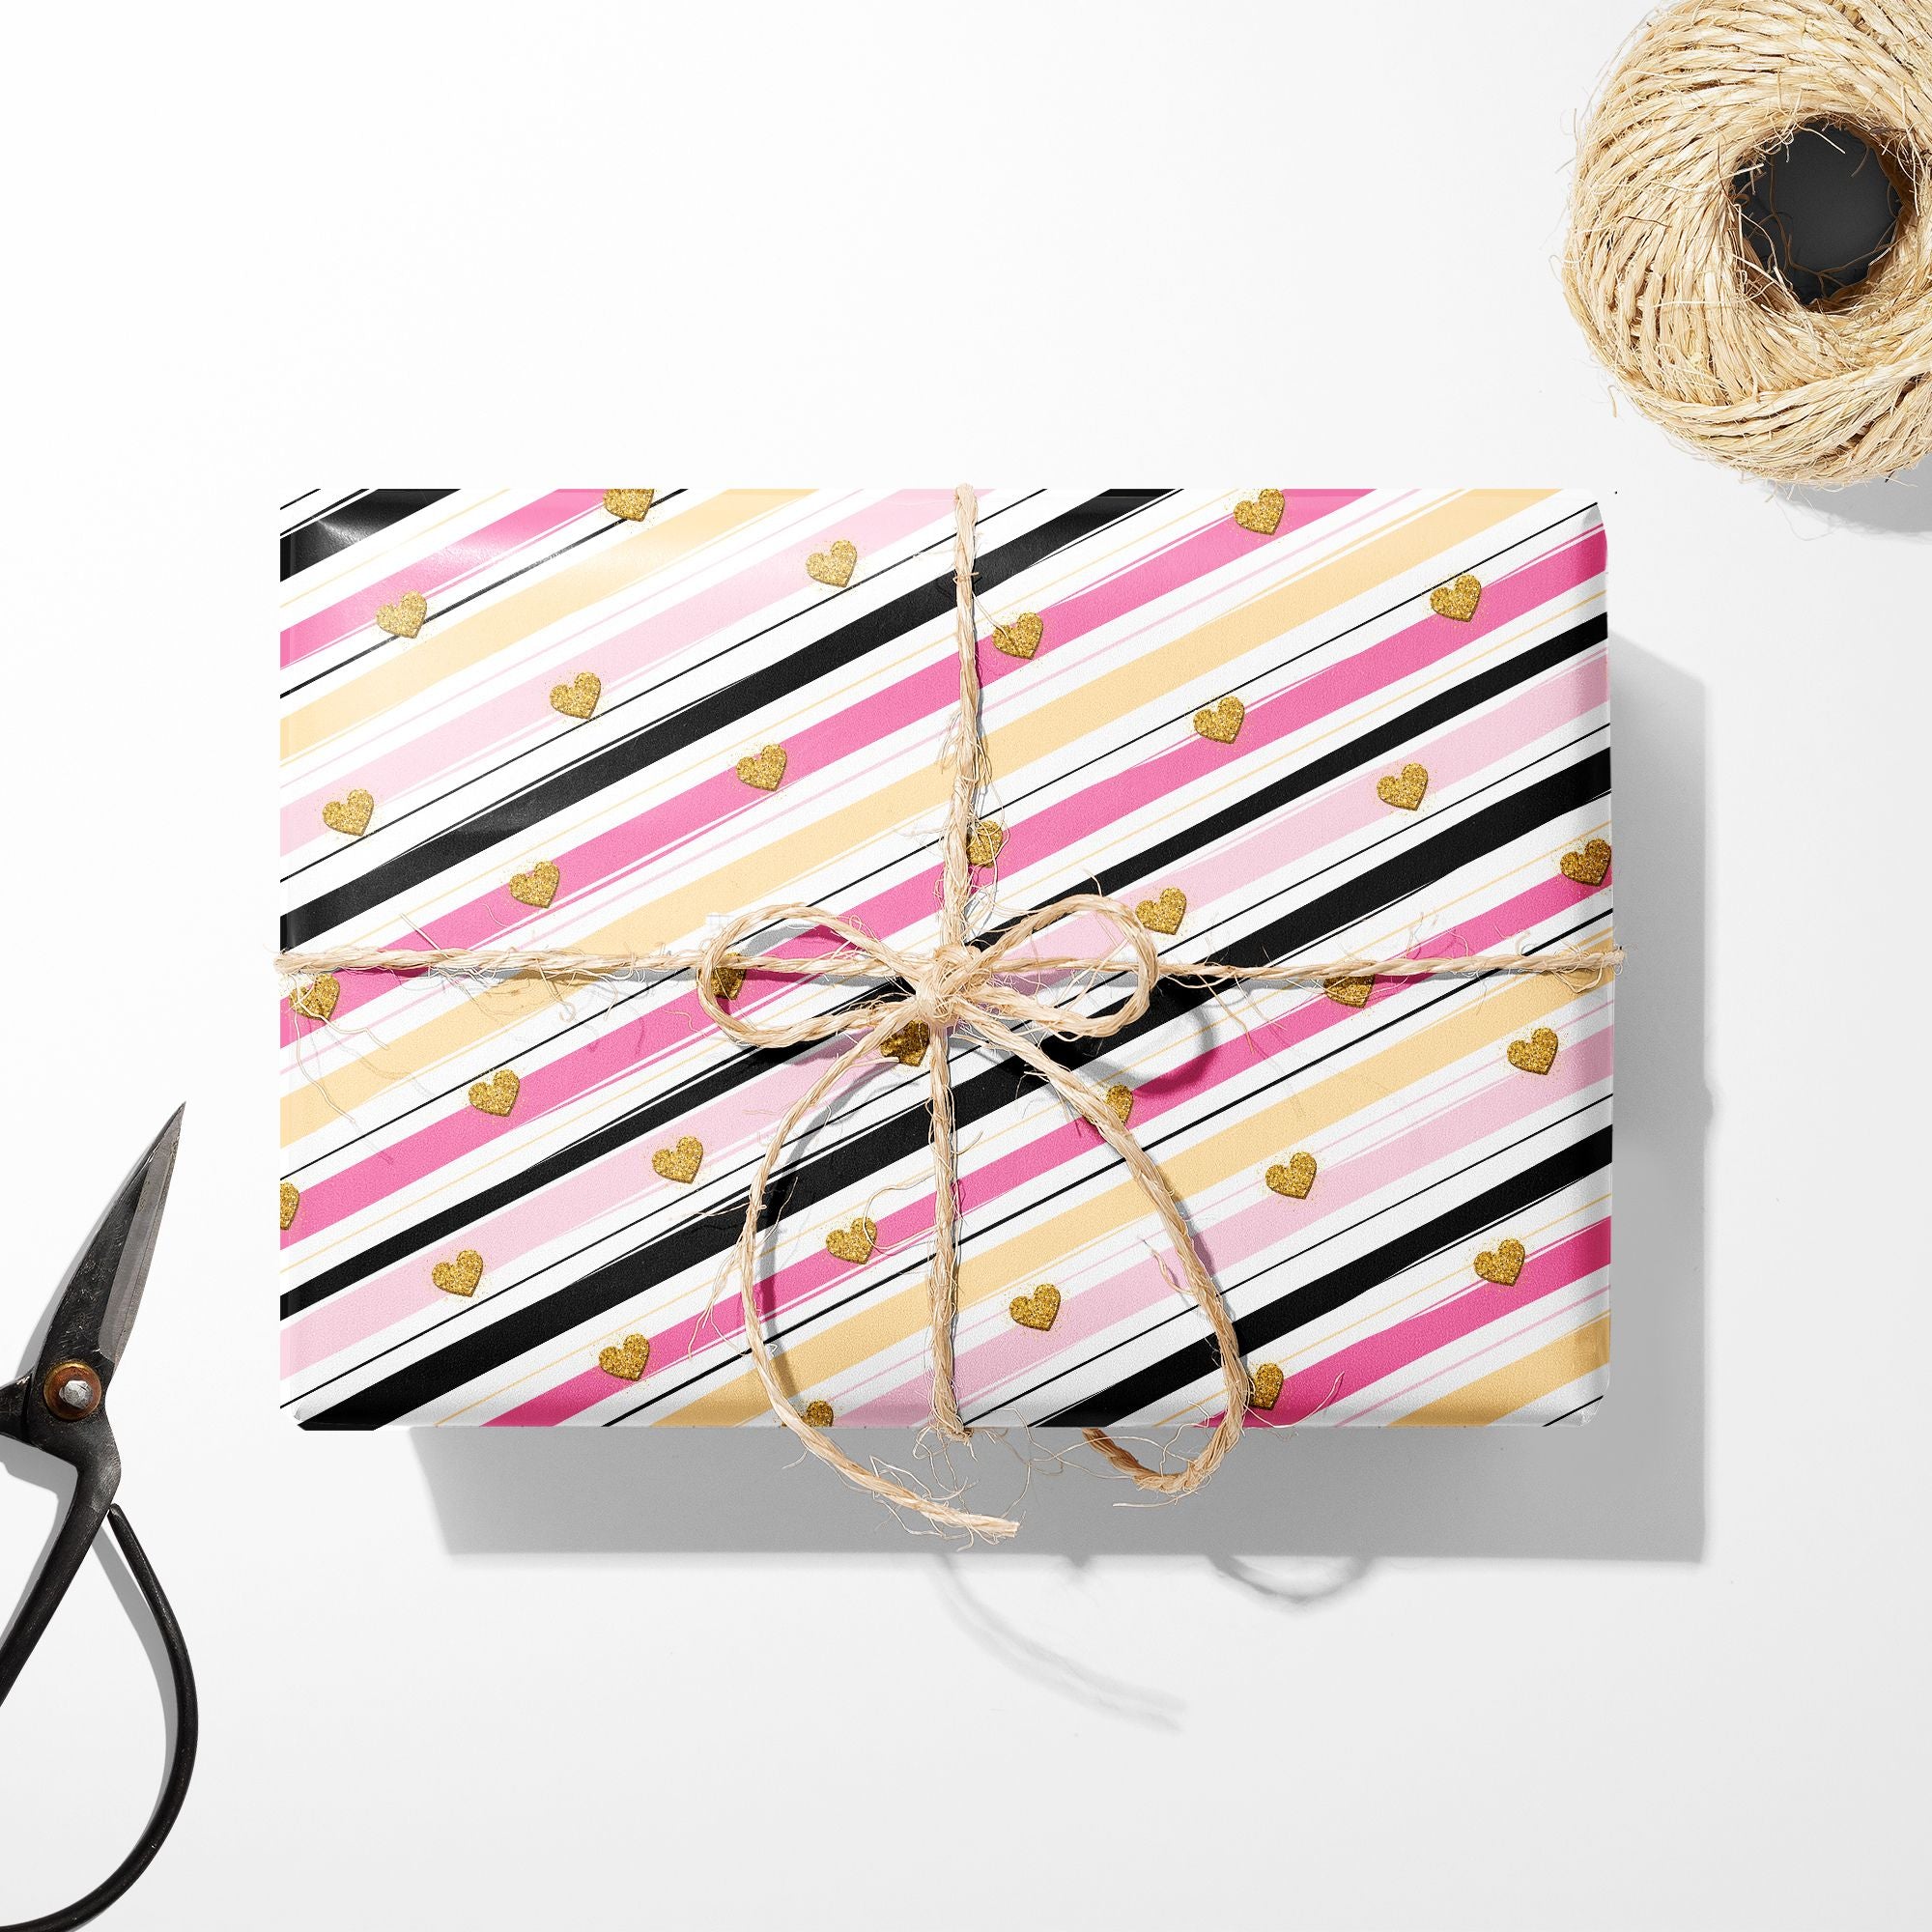 Premium Wrapping Paper for Gift Packing for all occasions - CelebrateWrap 4